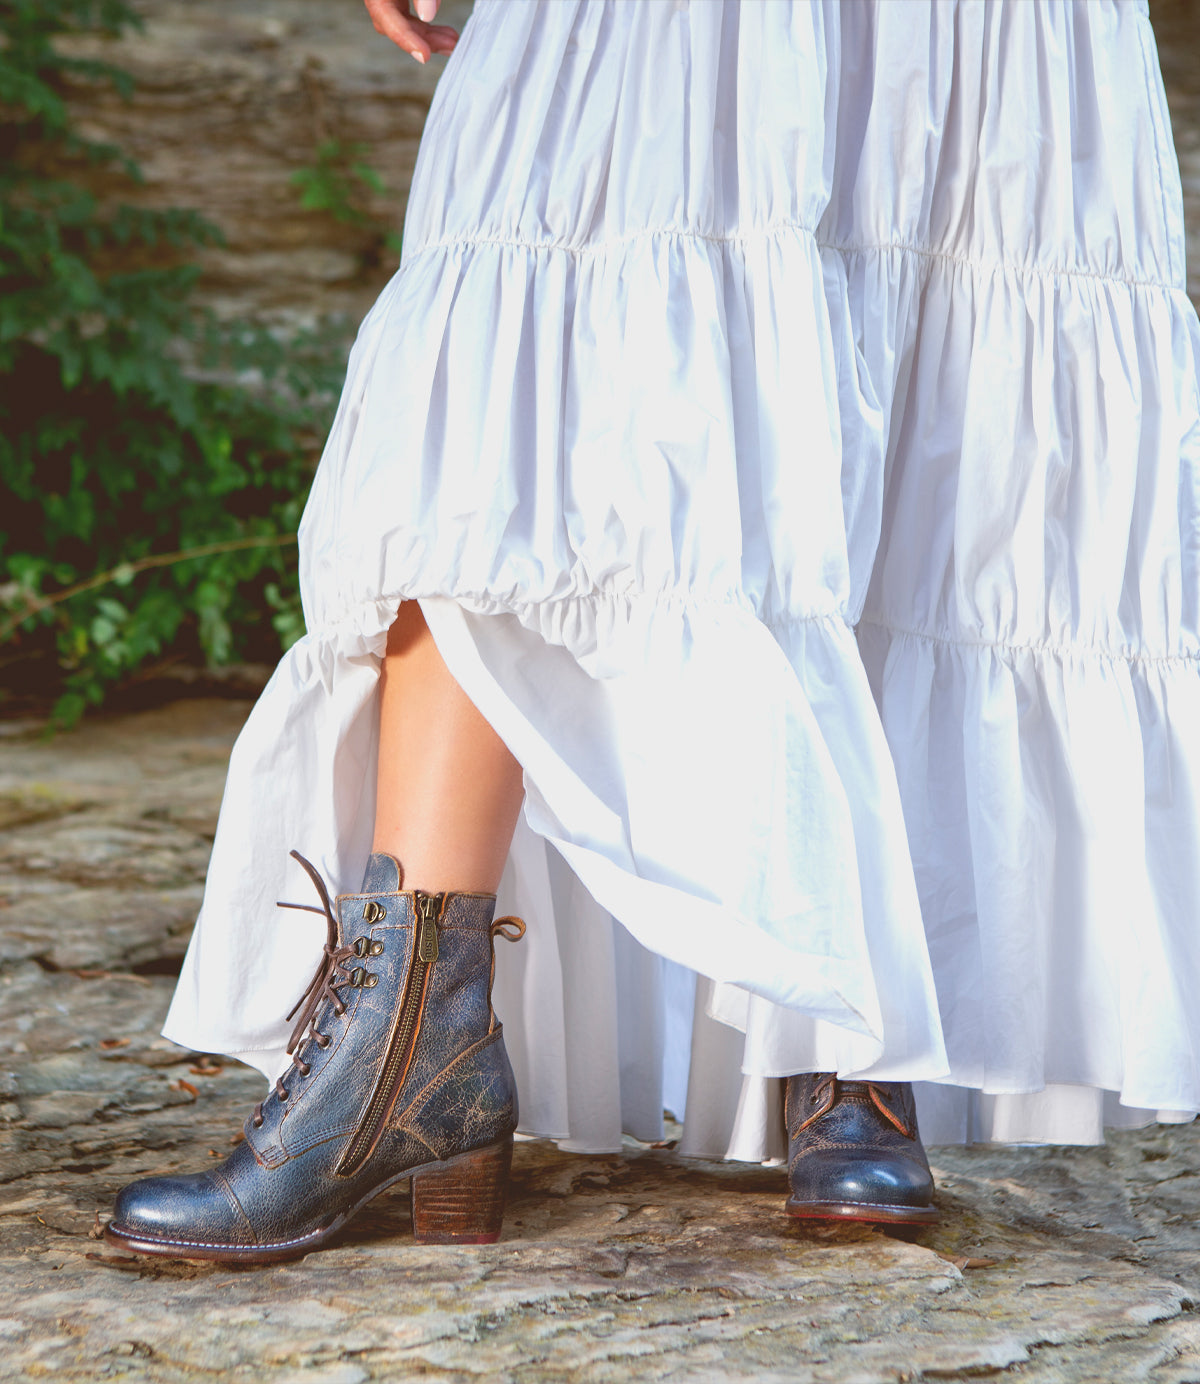 A woman wearing a white dress and Bed Stu Judgement boots.